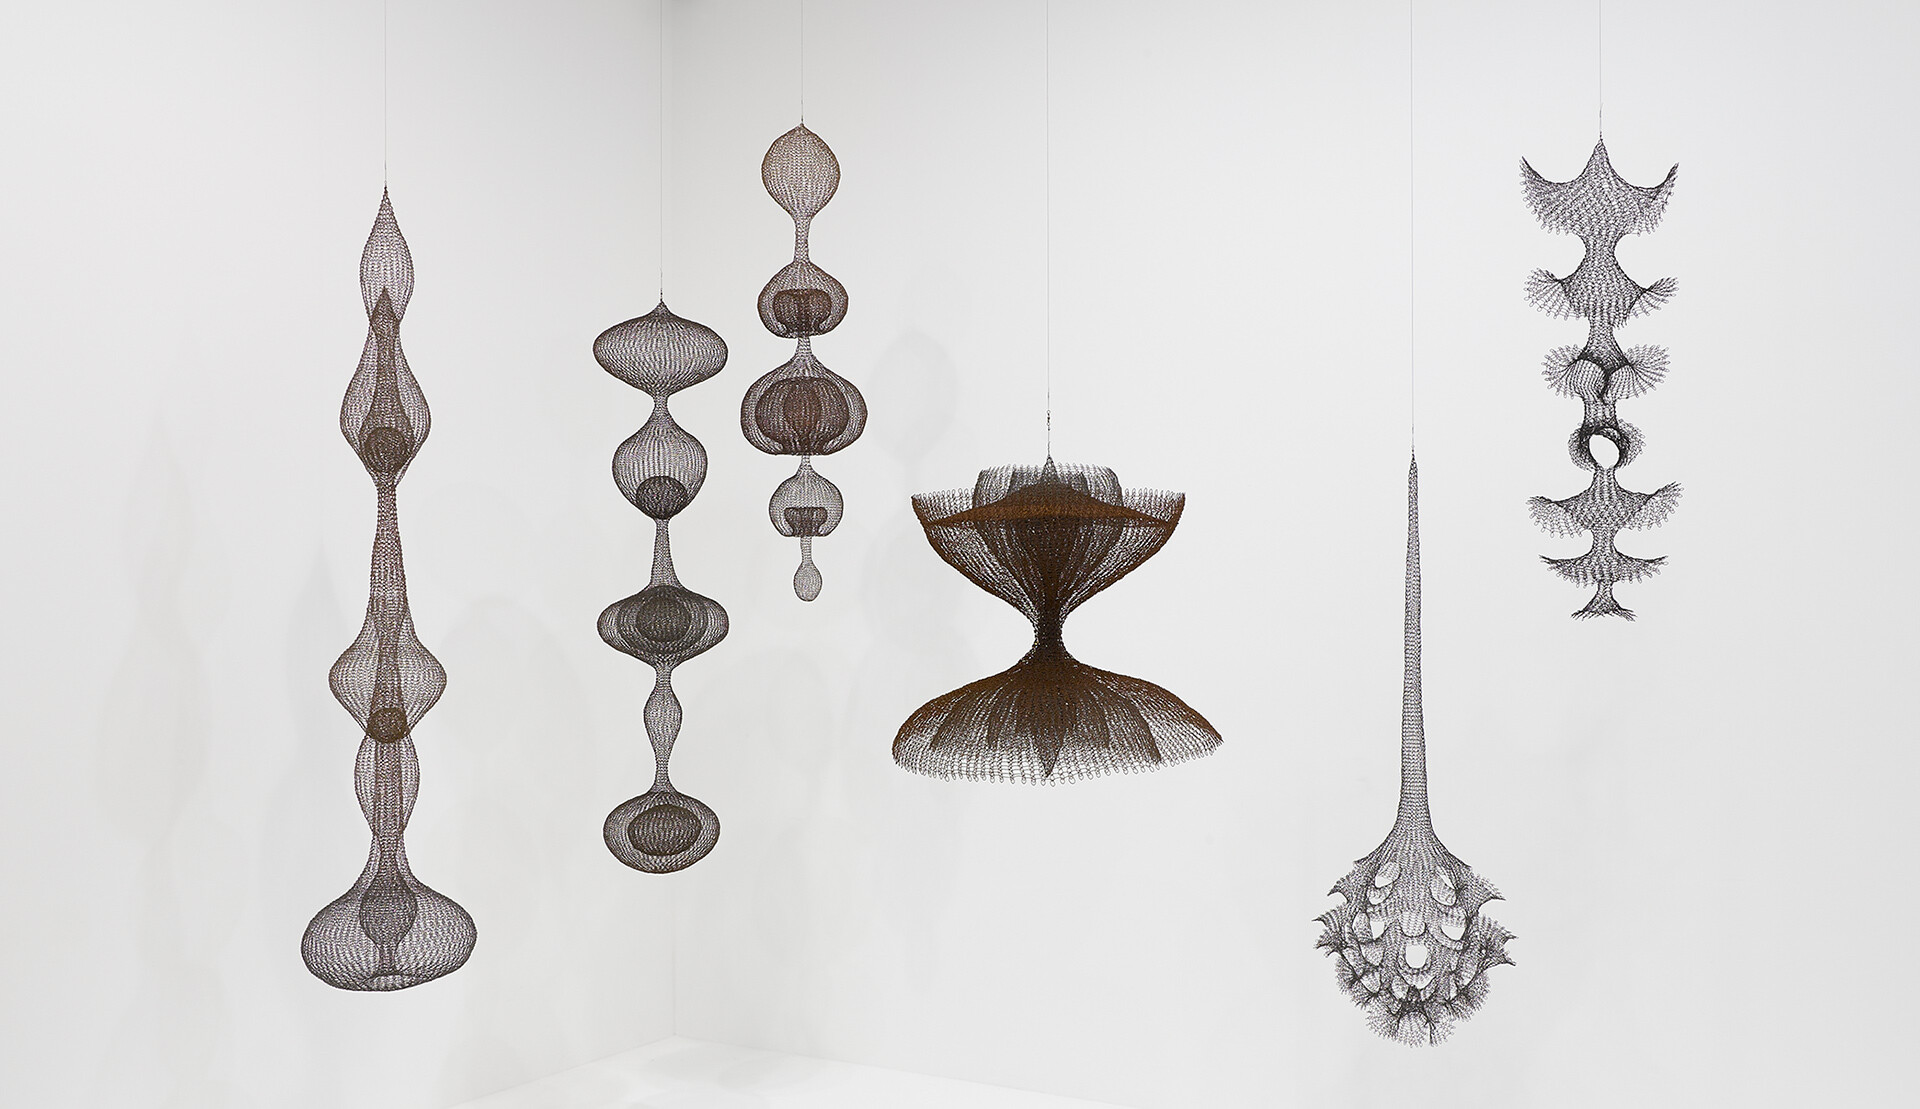 An installation view of the exhibition Ruth Asawa: A line can go anywhere at David Zwirner London, 2020.